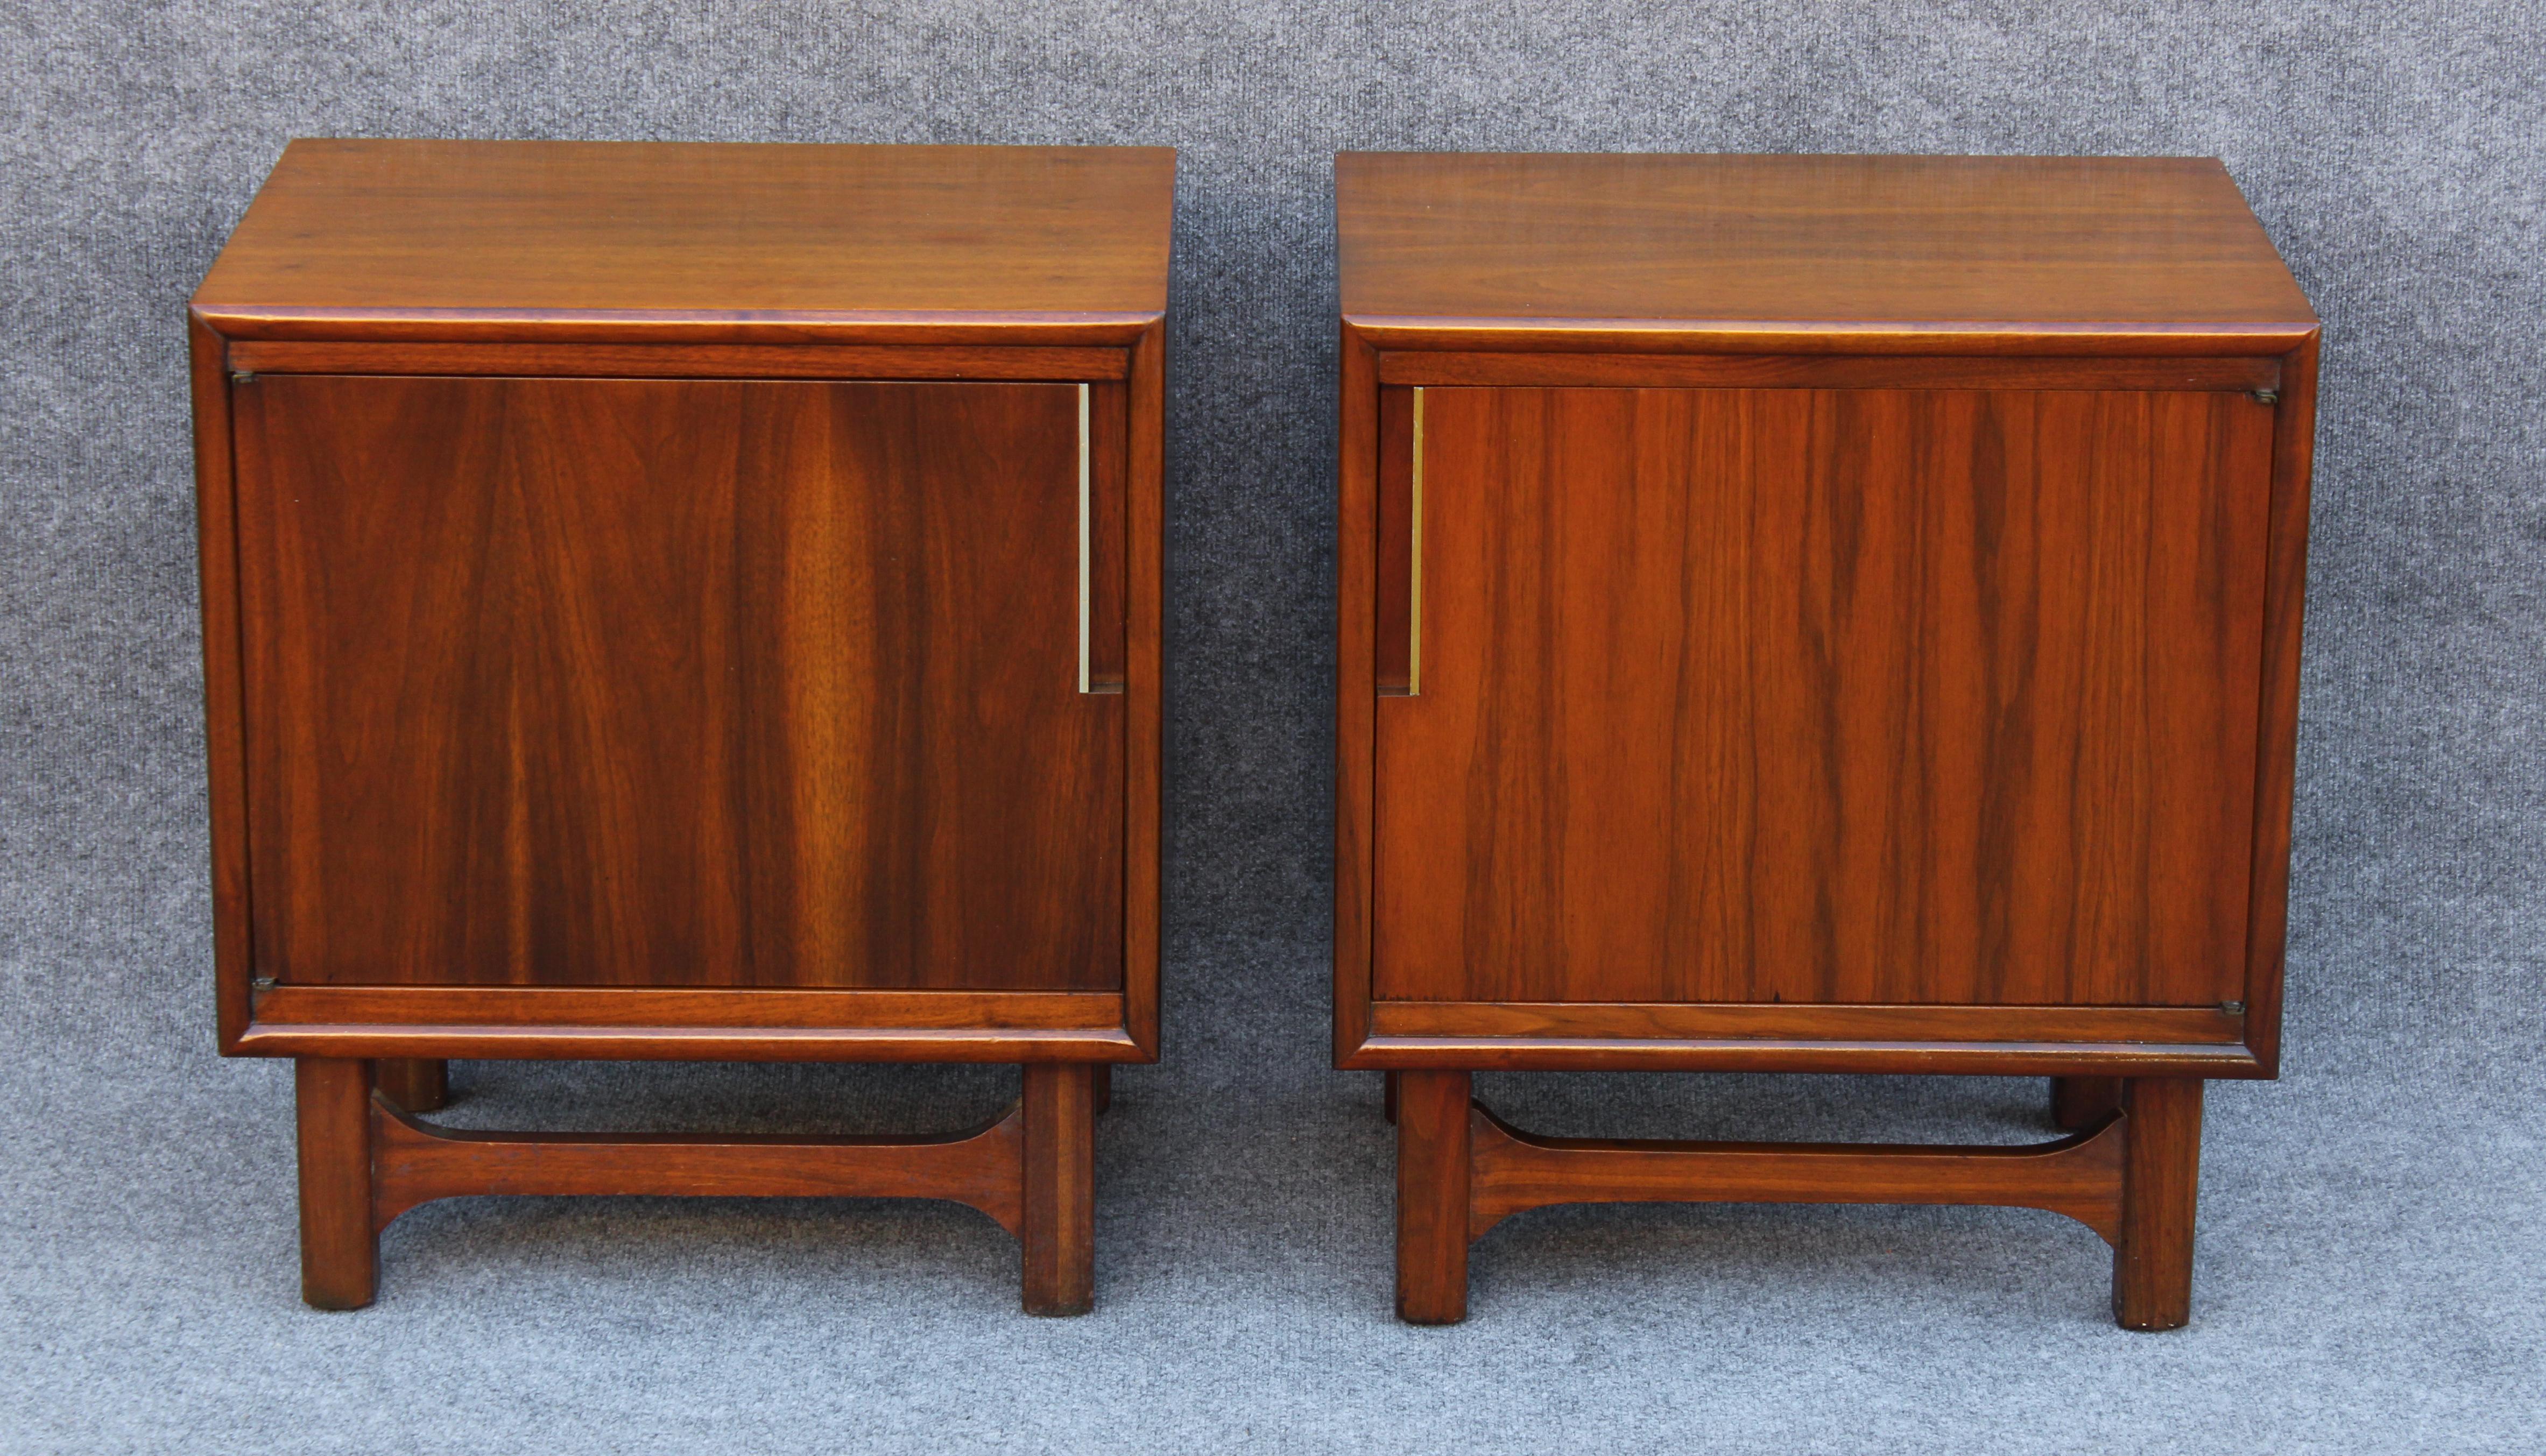 Designed by Merton Gershun in the late 1960s for Cavalier, these nightstands or end tables feature a super refined design and great construction quality. Well built, they are constructed of walnut with a warm stain and have brass accents at the